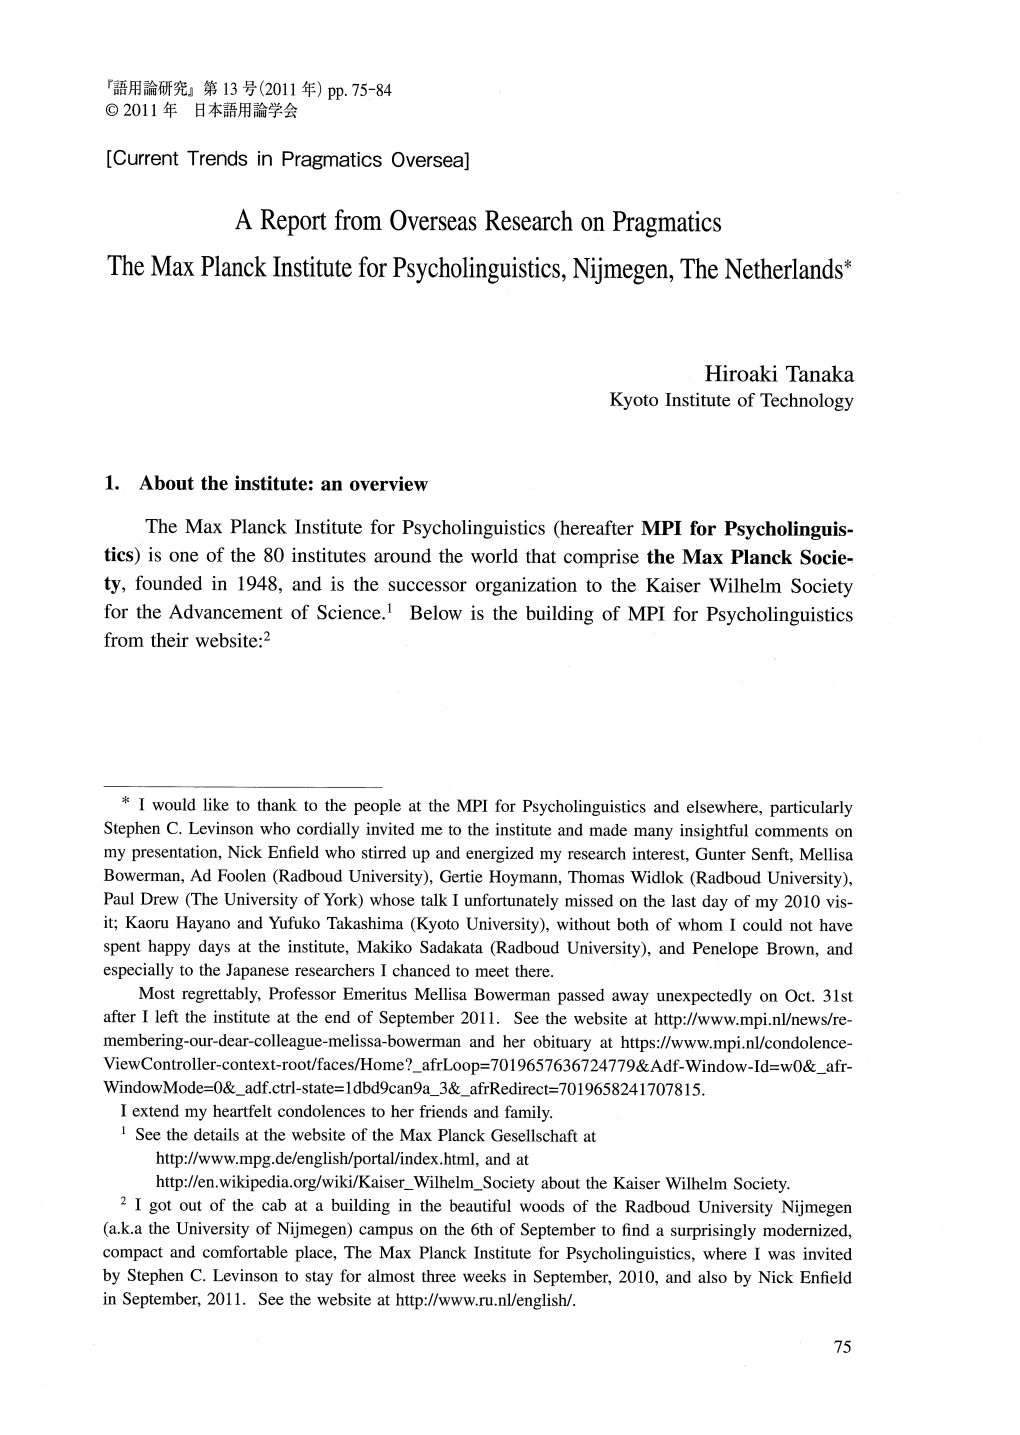 A Report from Overseas Research on Pragmatics the Max Planck Institute for Psycholinguistics, Nijmegen, the Netherlands*